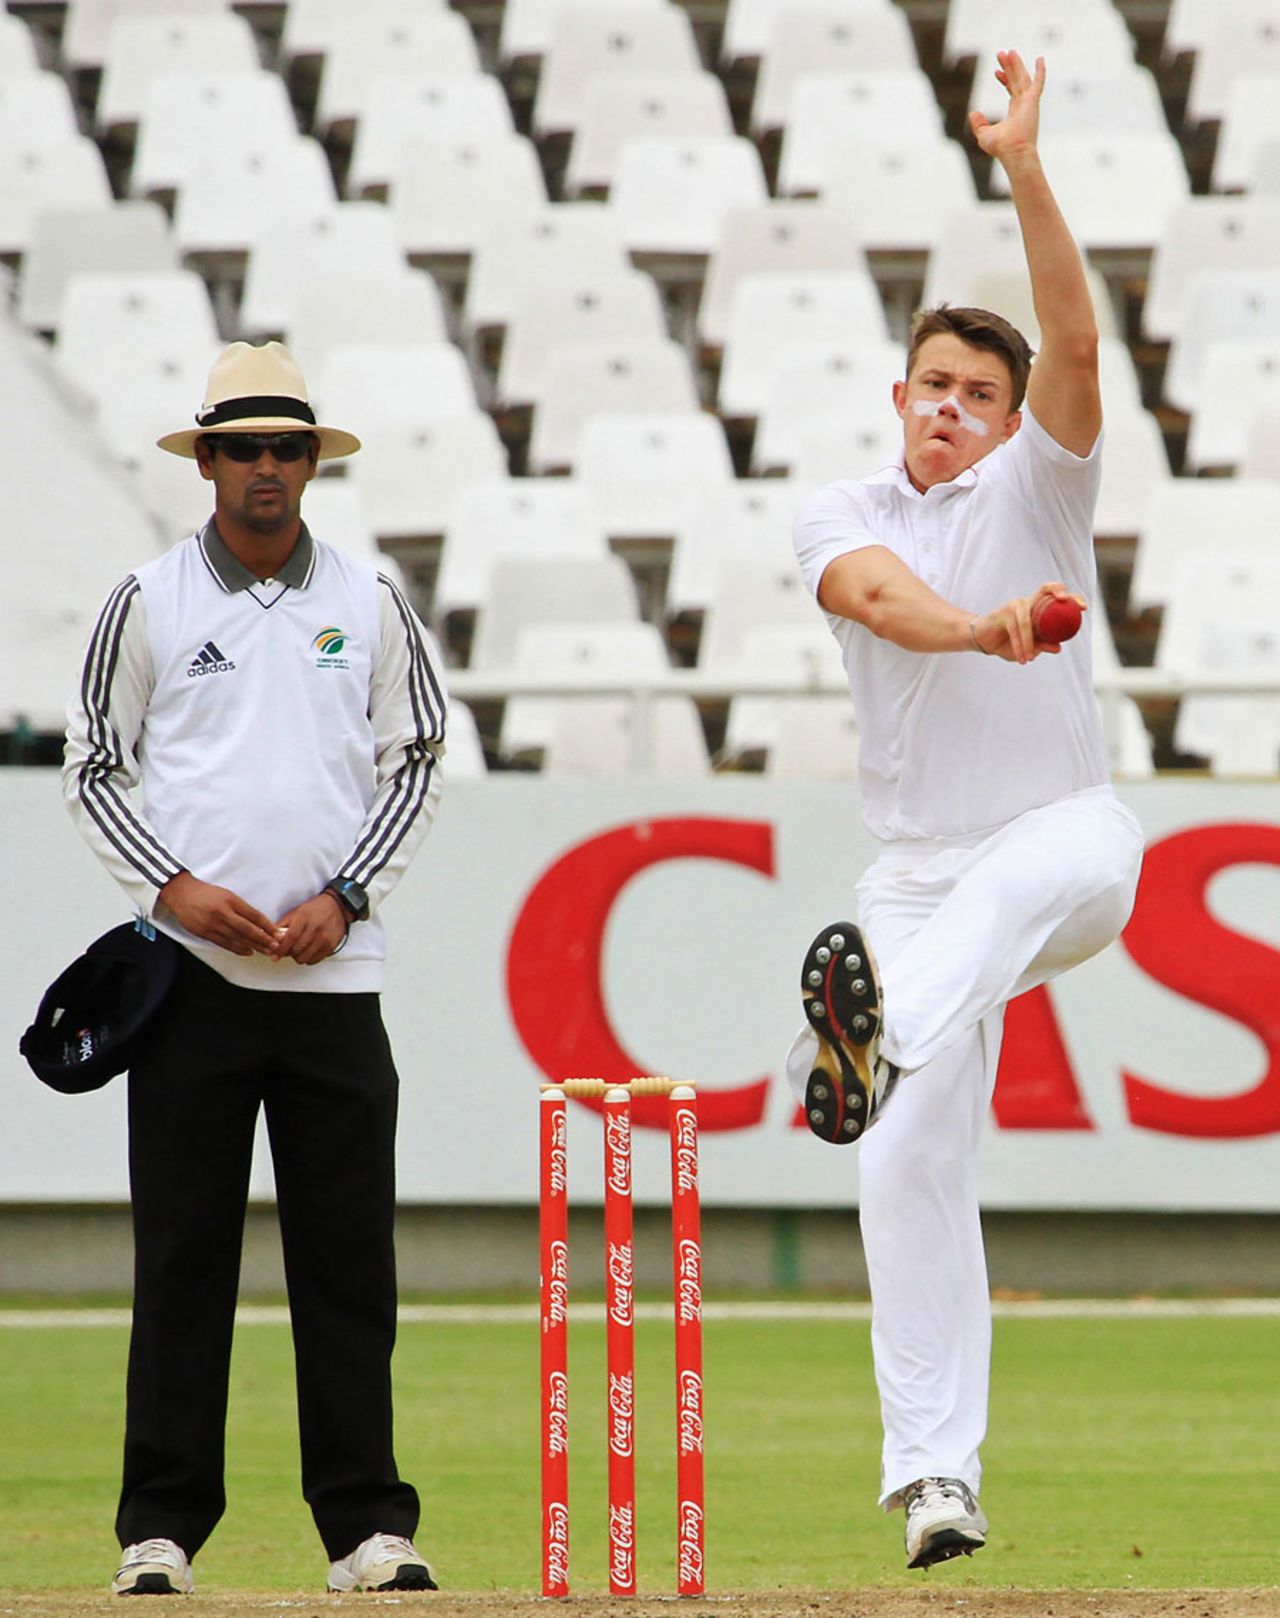 Josh Shaw bowls on the final day, South Africa Under-19 v England Under-19, 1st Youth Test, Cape Town, 3rd day, January, 29, 2013